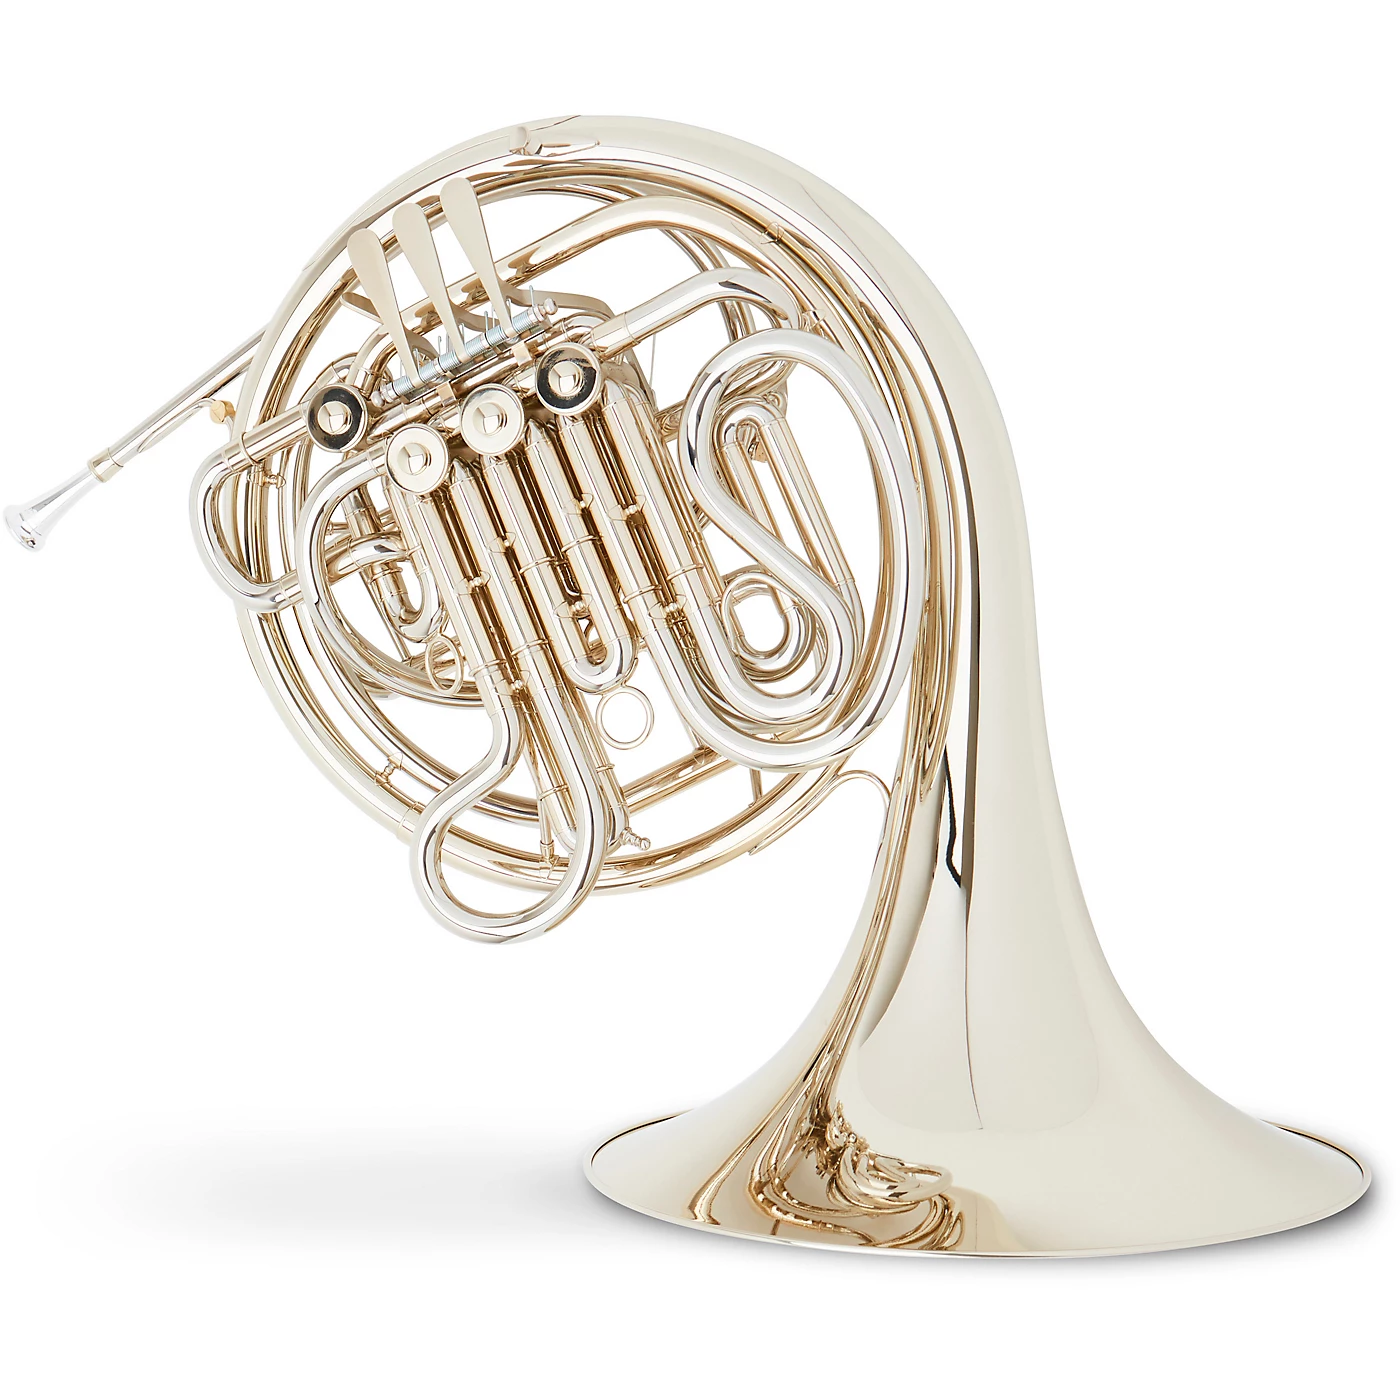 Holton H179 Farkas Series Fixed Bell Double Horn